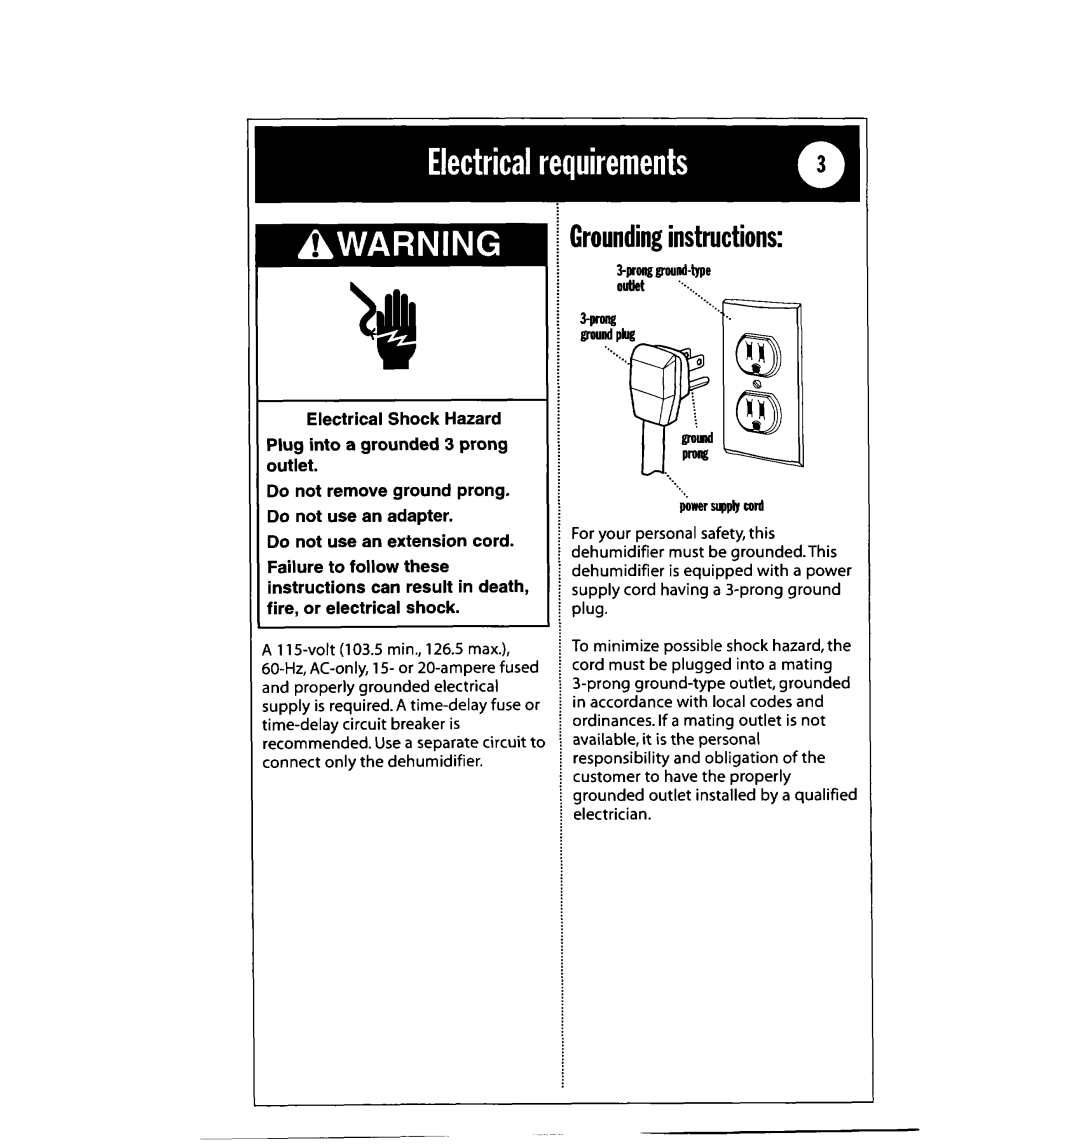 Whirlpool 1182182 manual Groundinginstructions, Electrical Shock Hazard, Plug into a grounded 3 prong outlet 